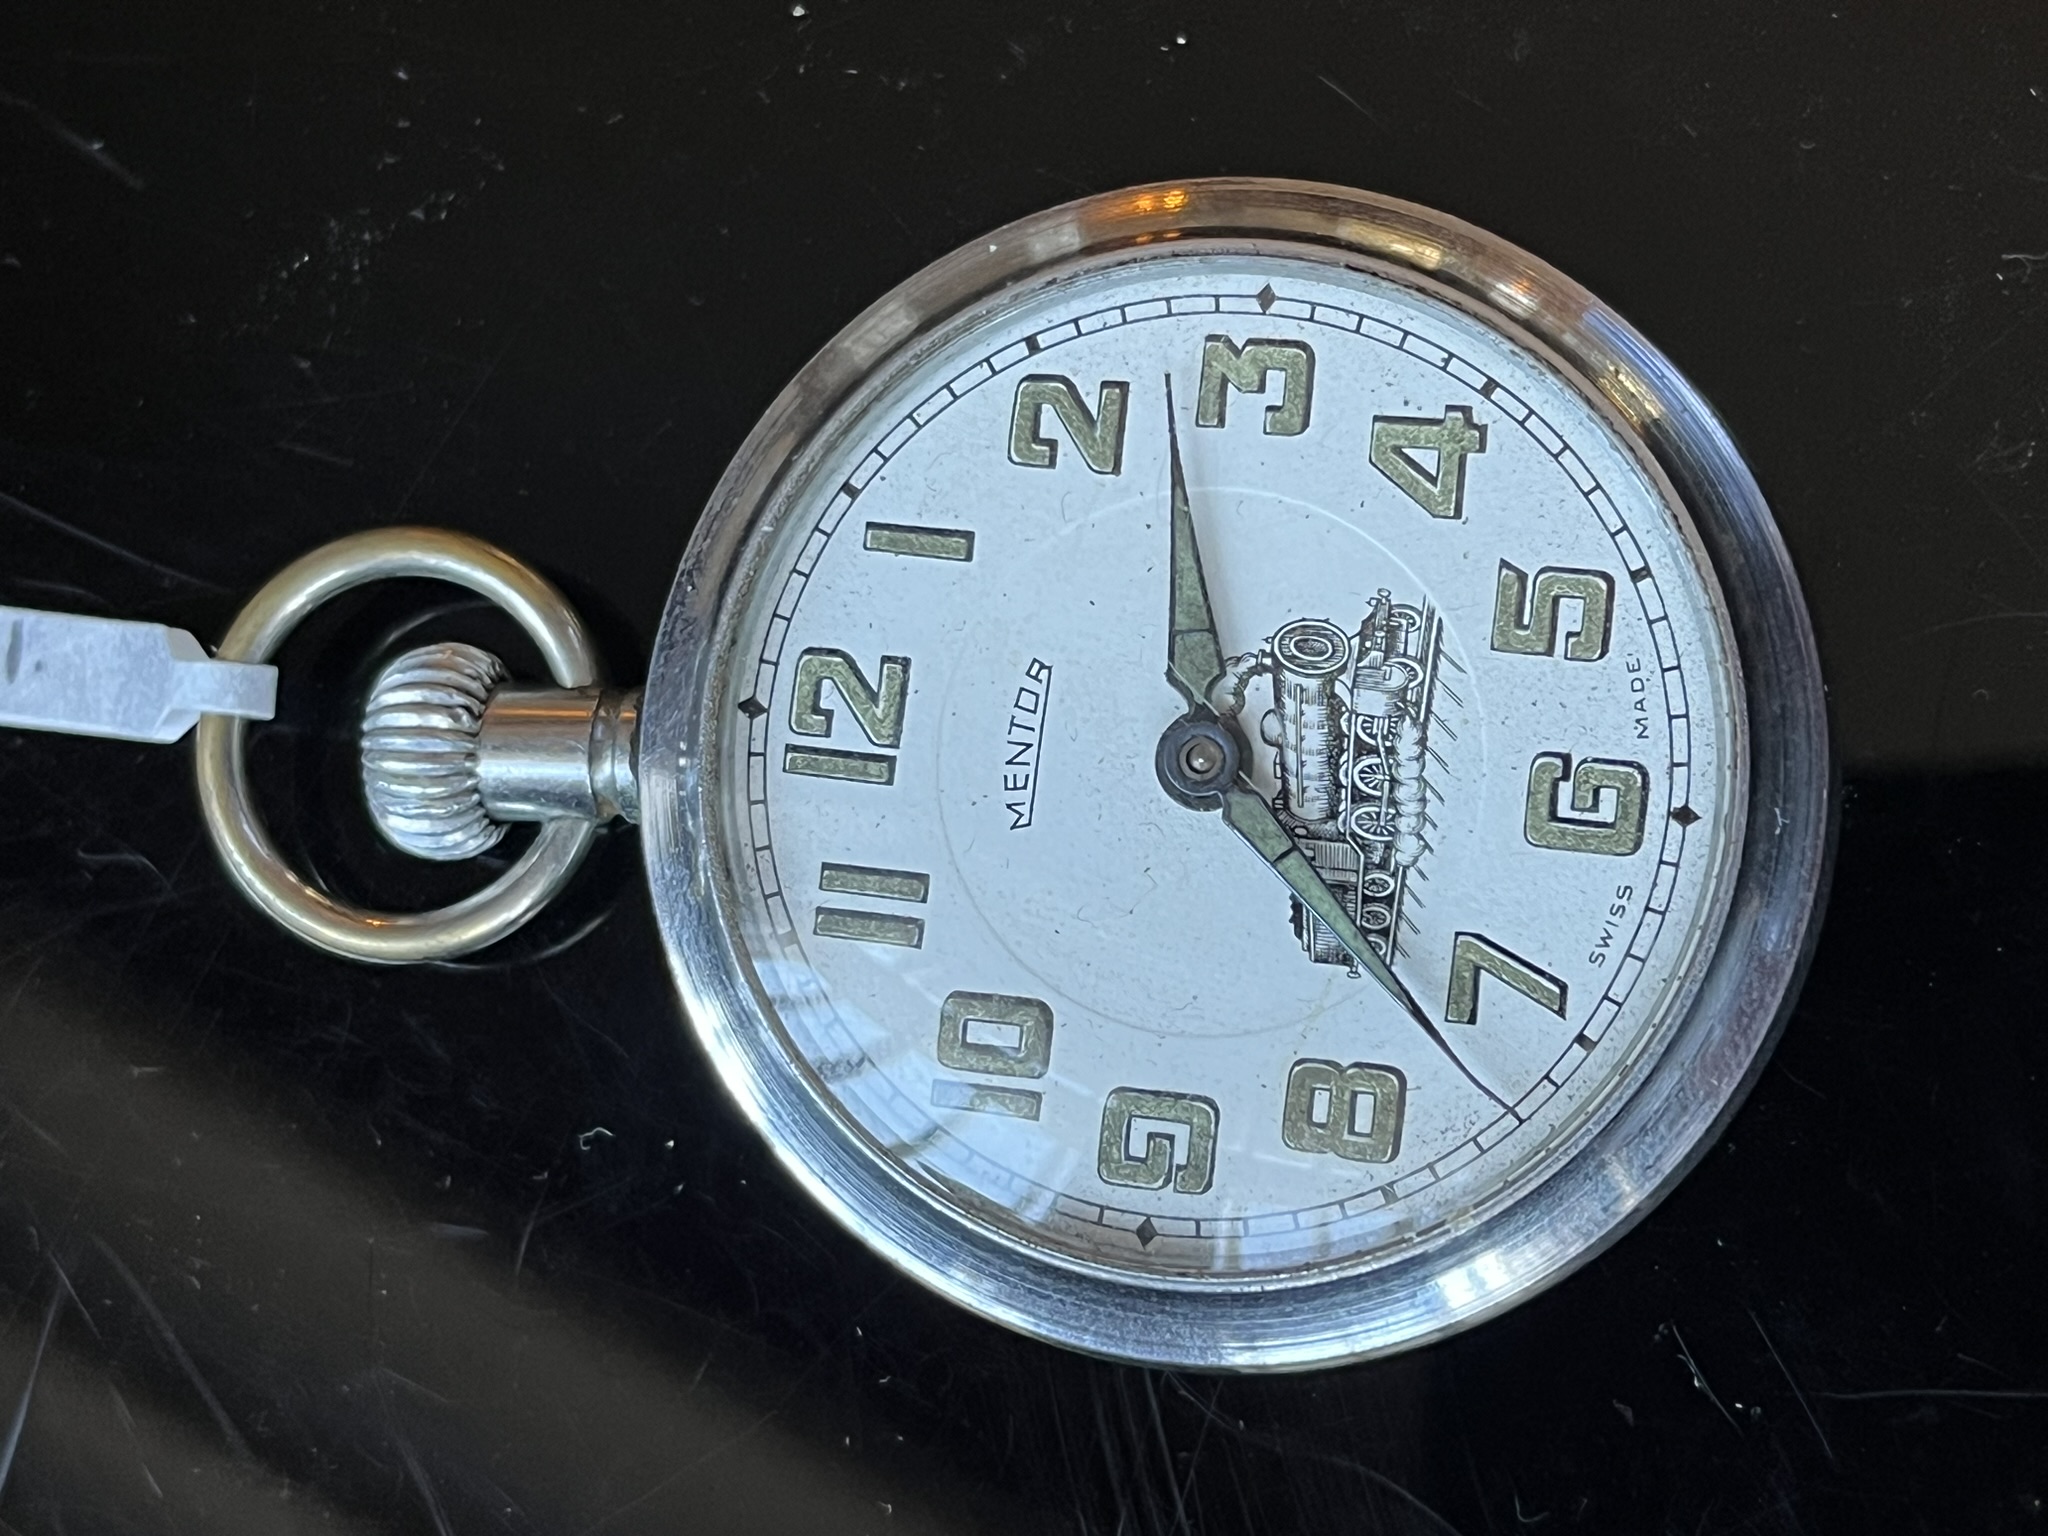 An early-to-mid 20th Century Mentor stye pocket watch with white enamel face steam engine train on